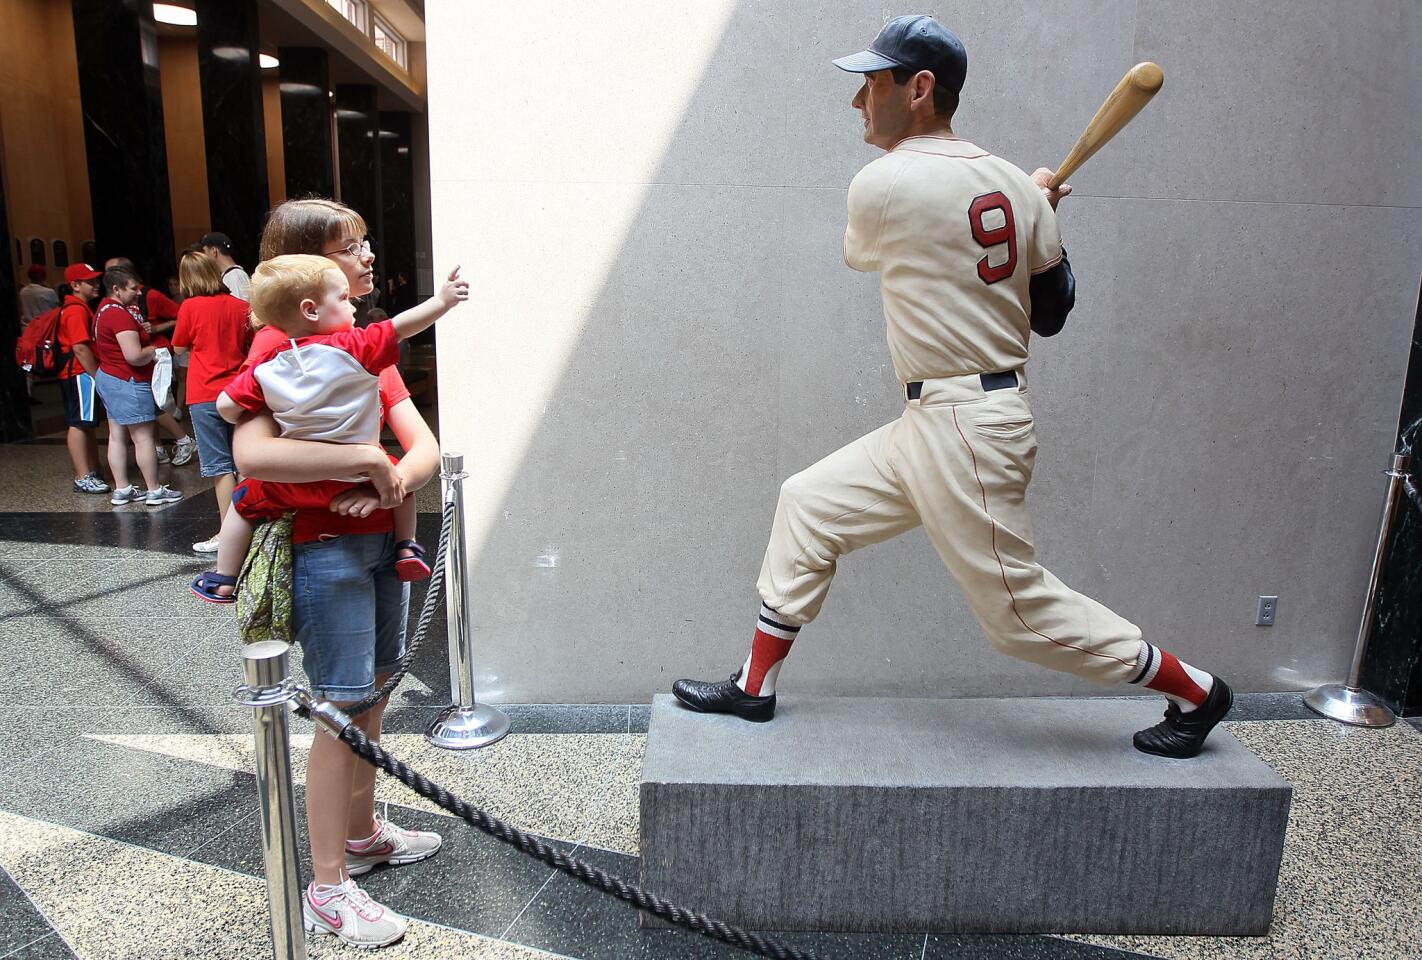 Visitors view a statue of Ted Williams at the baseball Hall of Fame.